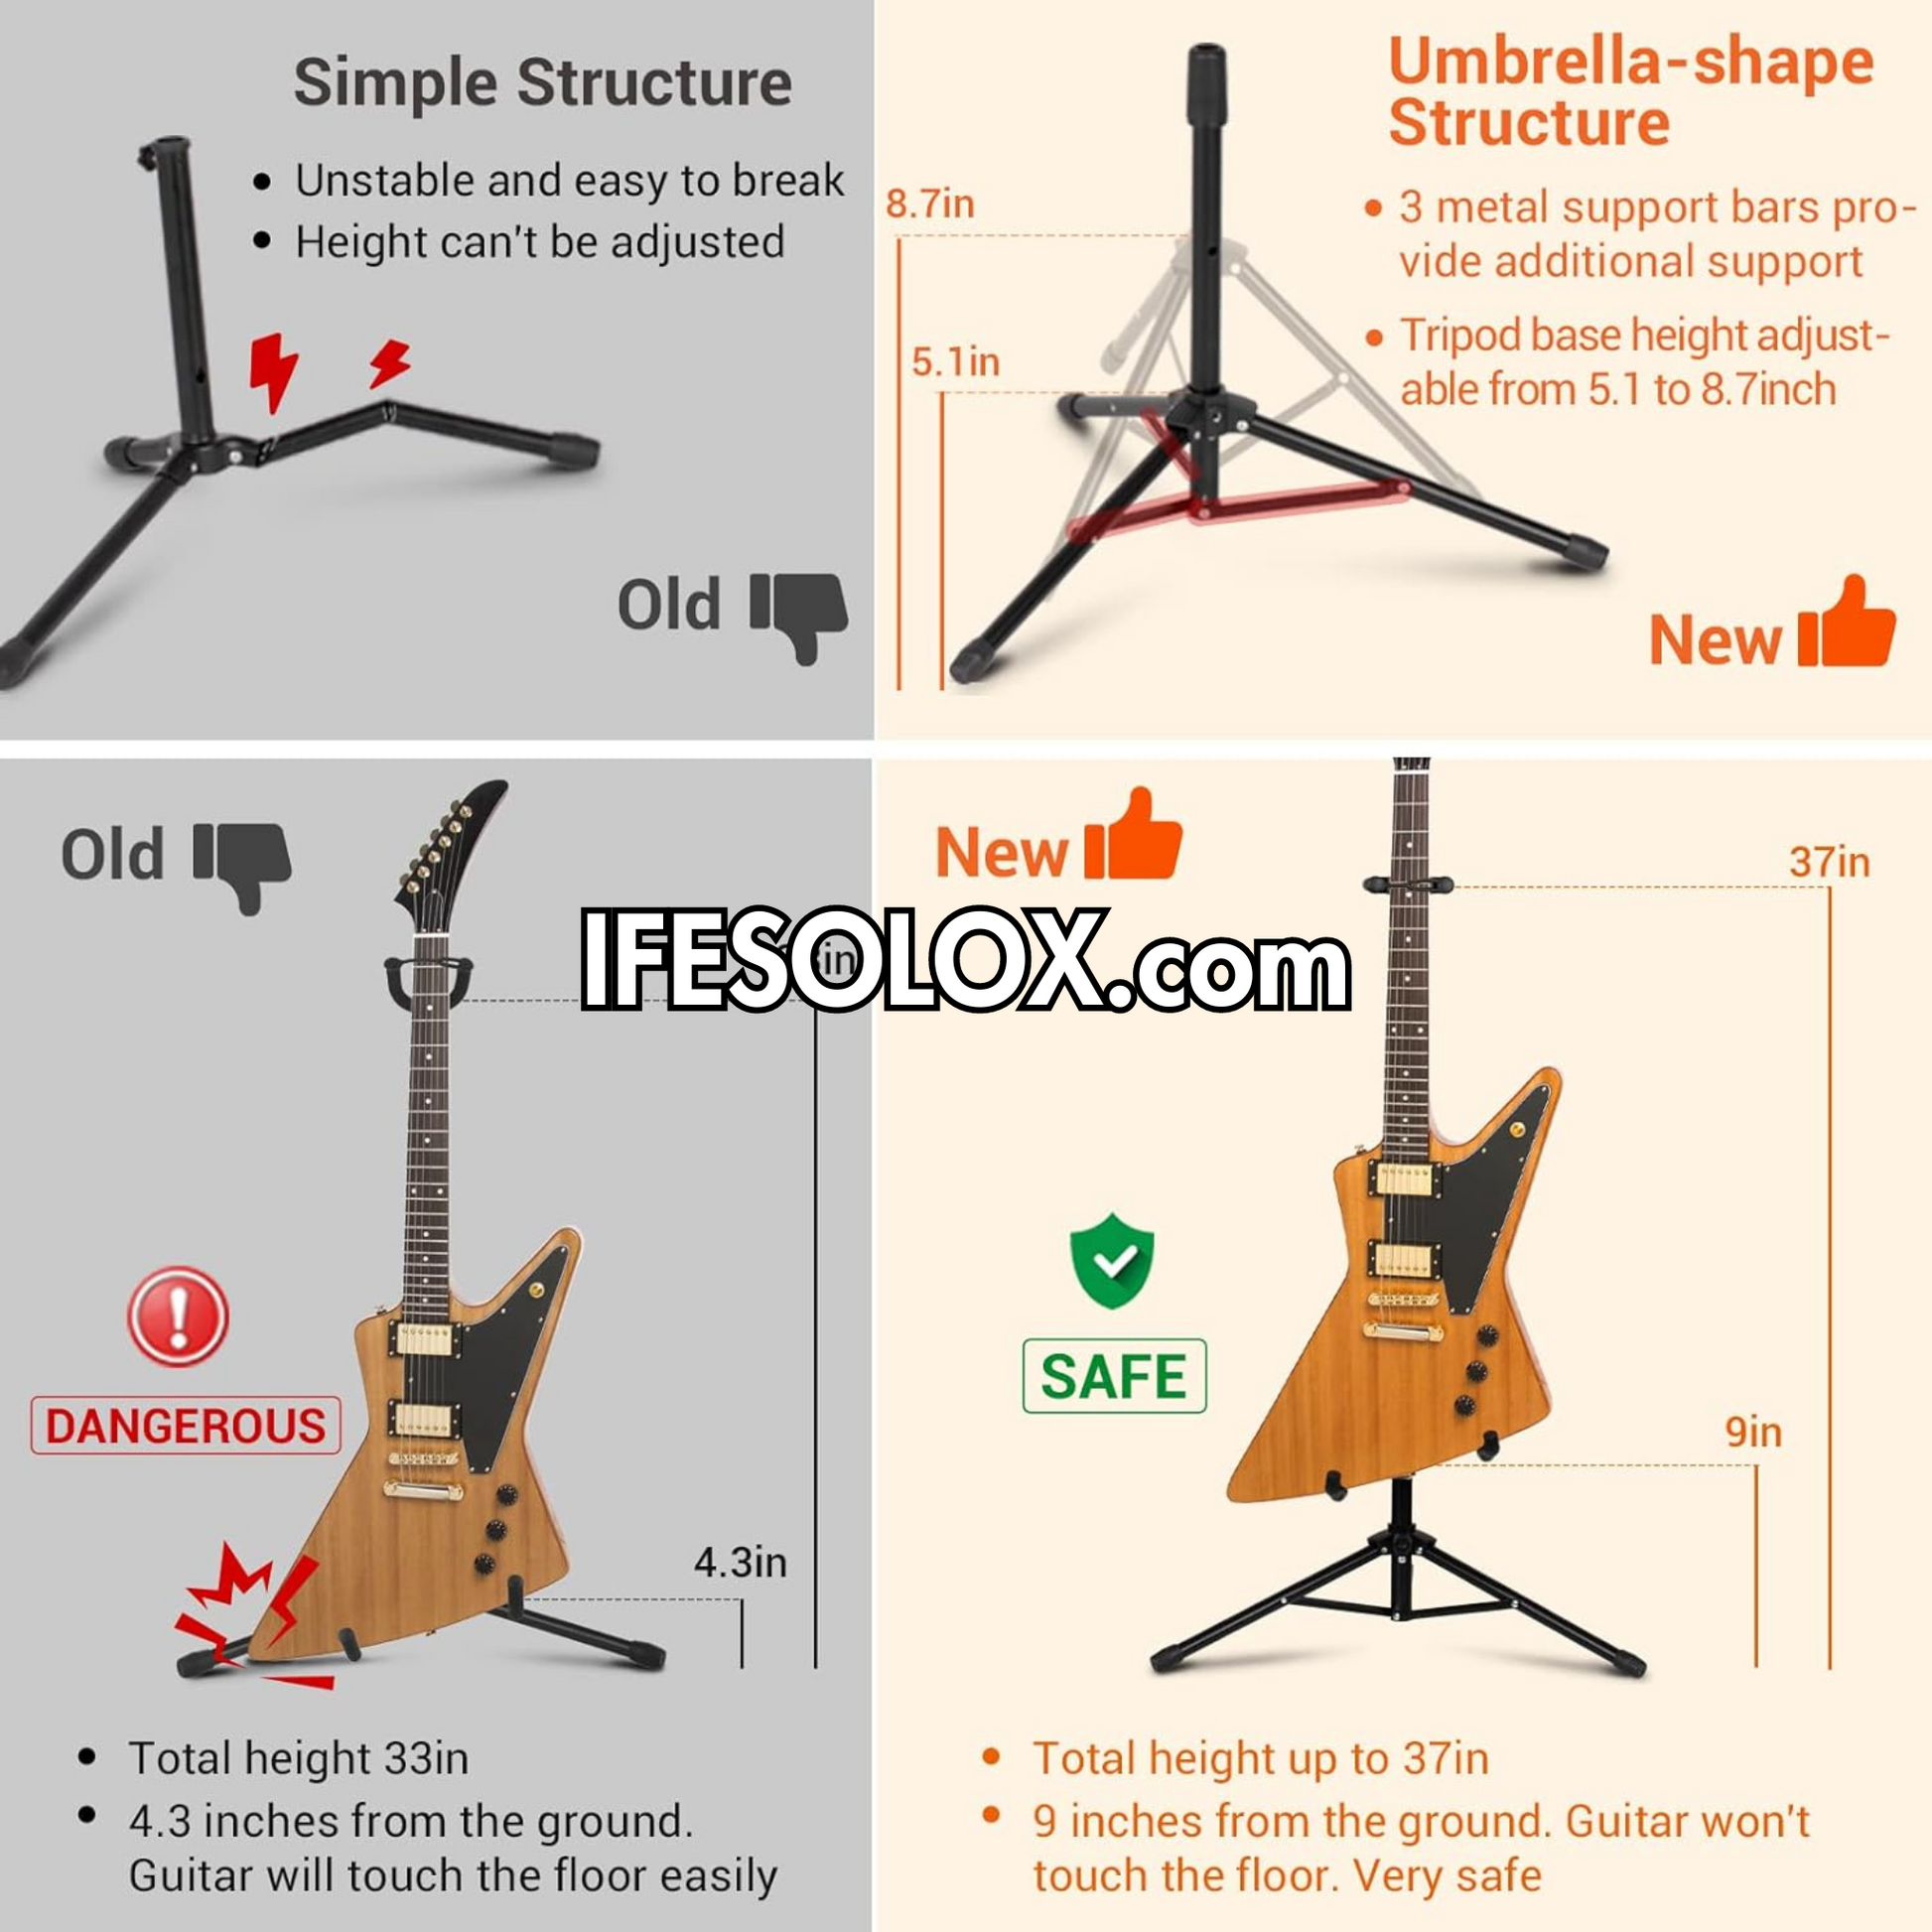 SLX Universal Guitar Stand with Neck Holder for Acoustic, Bass and Electric Guitars - Brand New